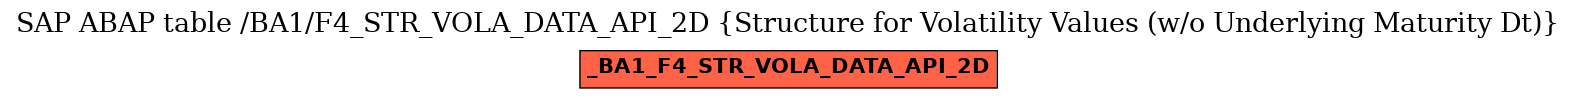 E-R Diagram for table /BA1/F4_STR_VOLA_DATA_API_2D (Structure for Volatility Values (w/o Underlying Maturity Dt))